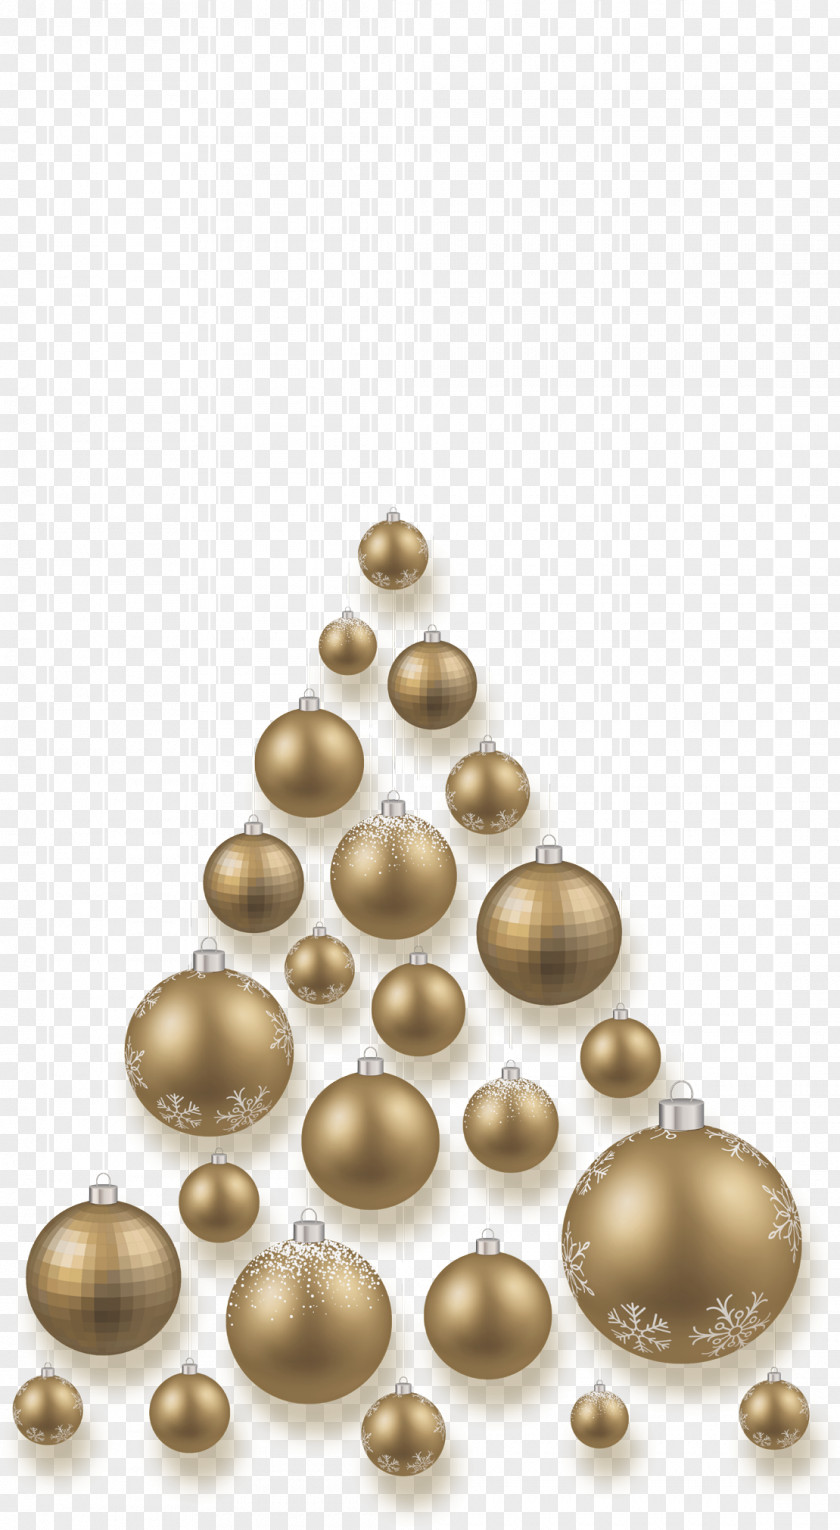 Brass 01504 Material PNG